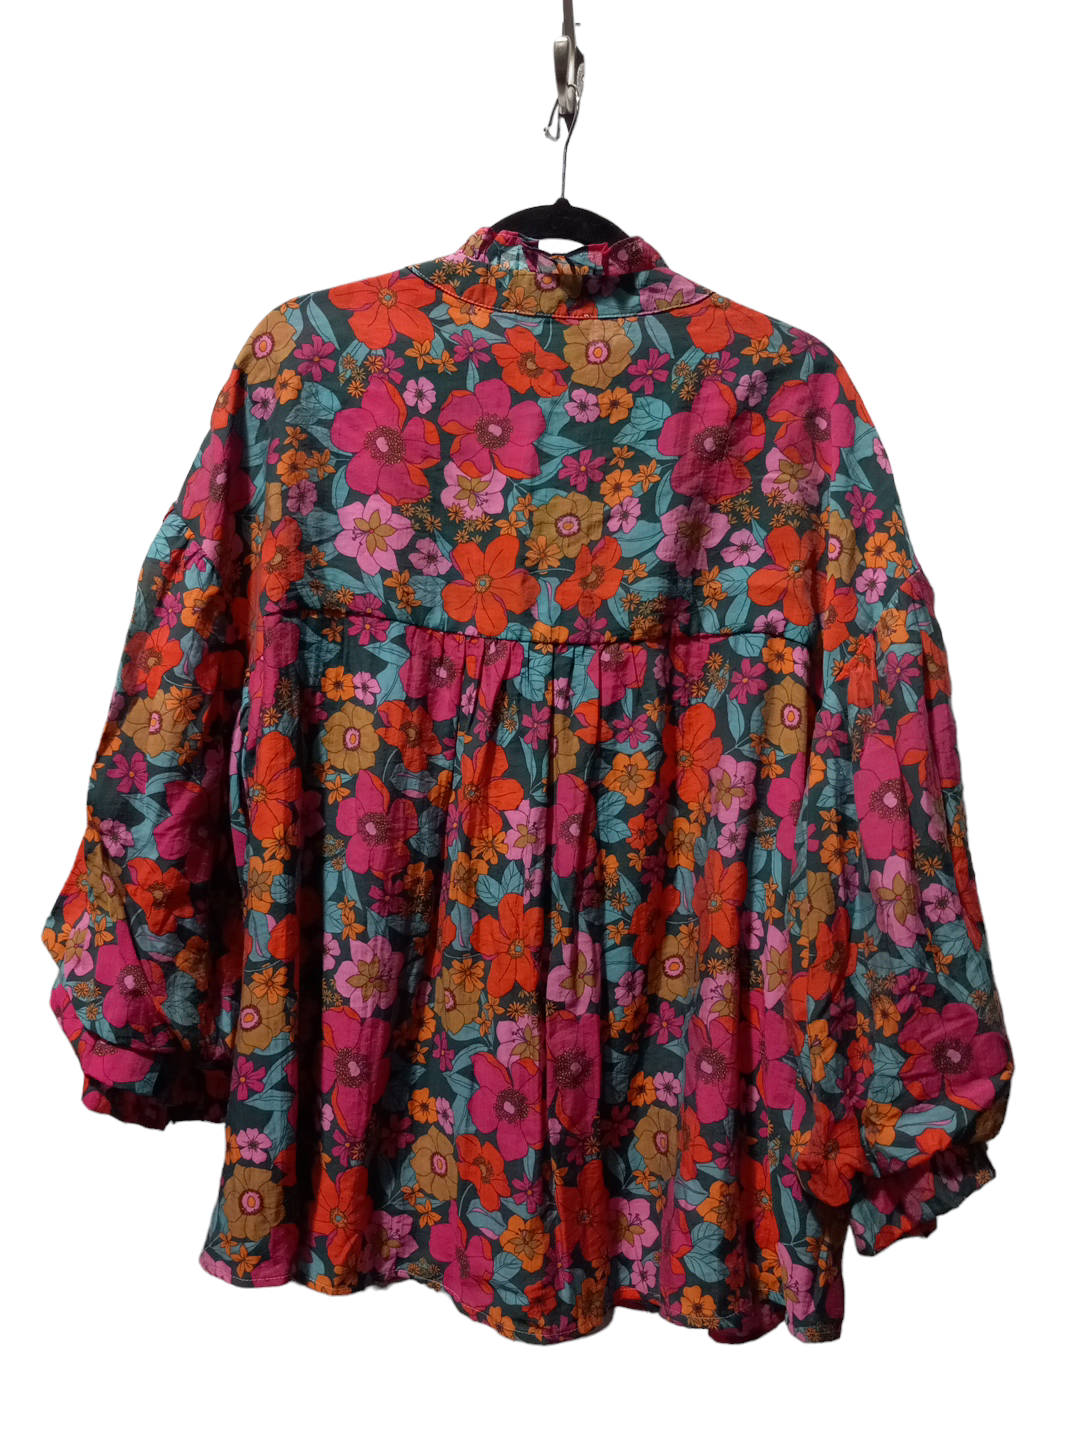 Floral Print Blouse 3/4 Sleeve Fate, Size 1x